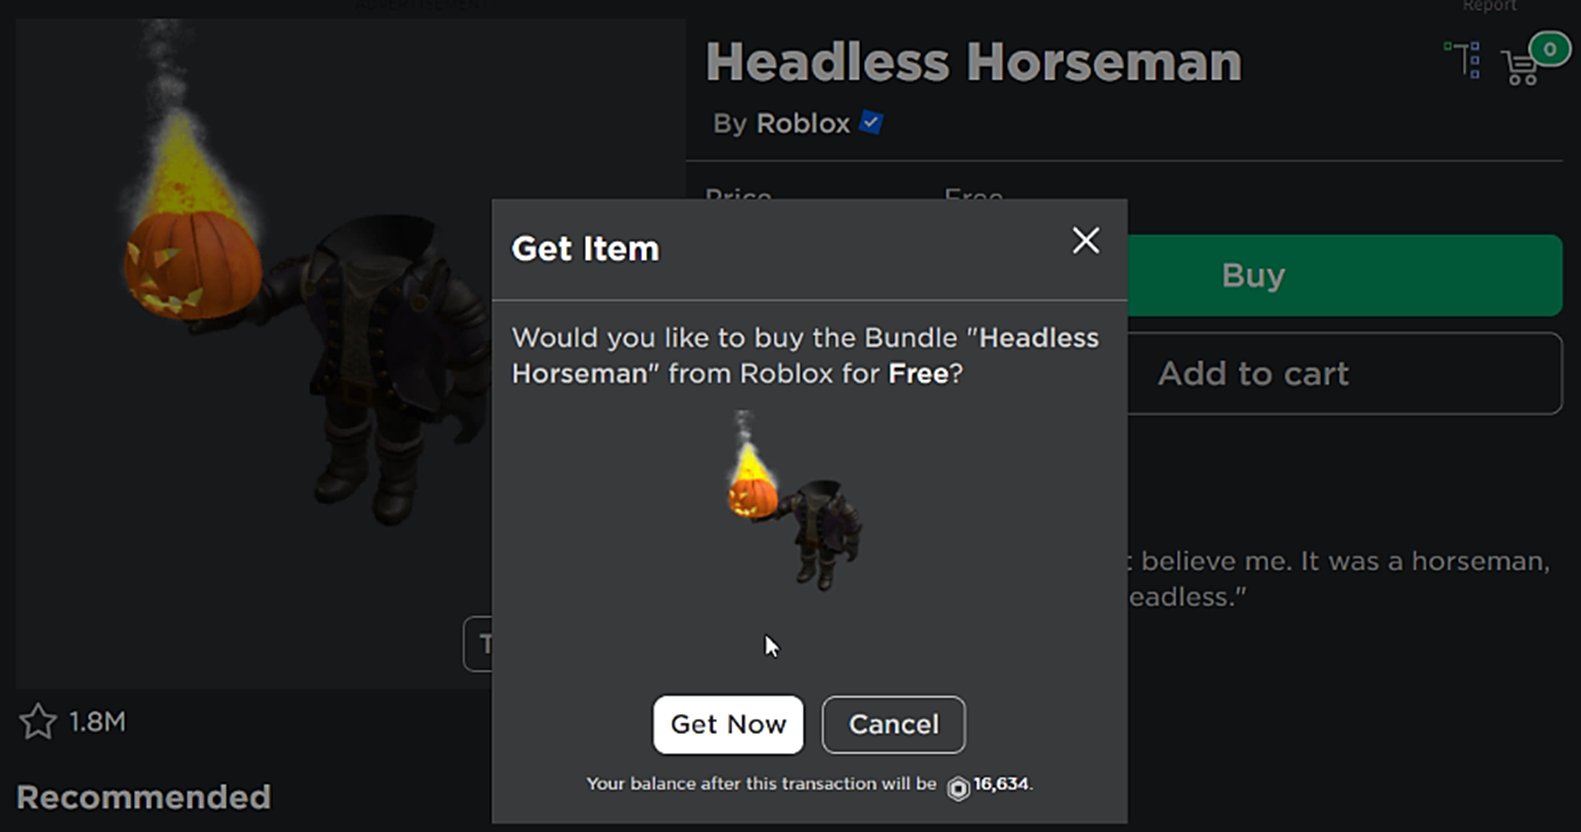 Is headless horseman going on-sale this year? ROBLOX ANSWERED! 